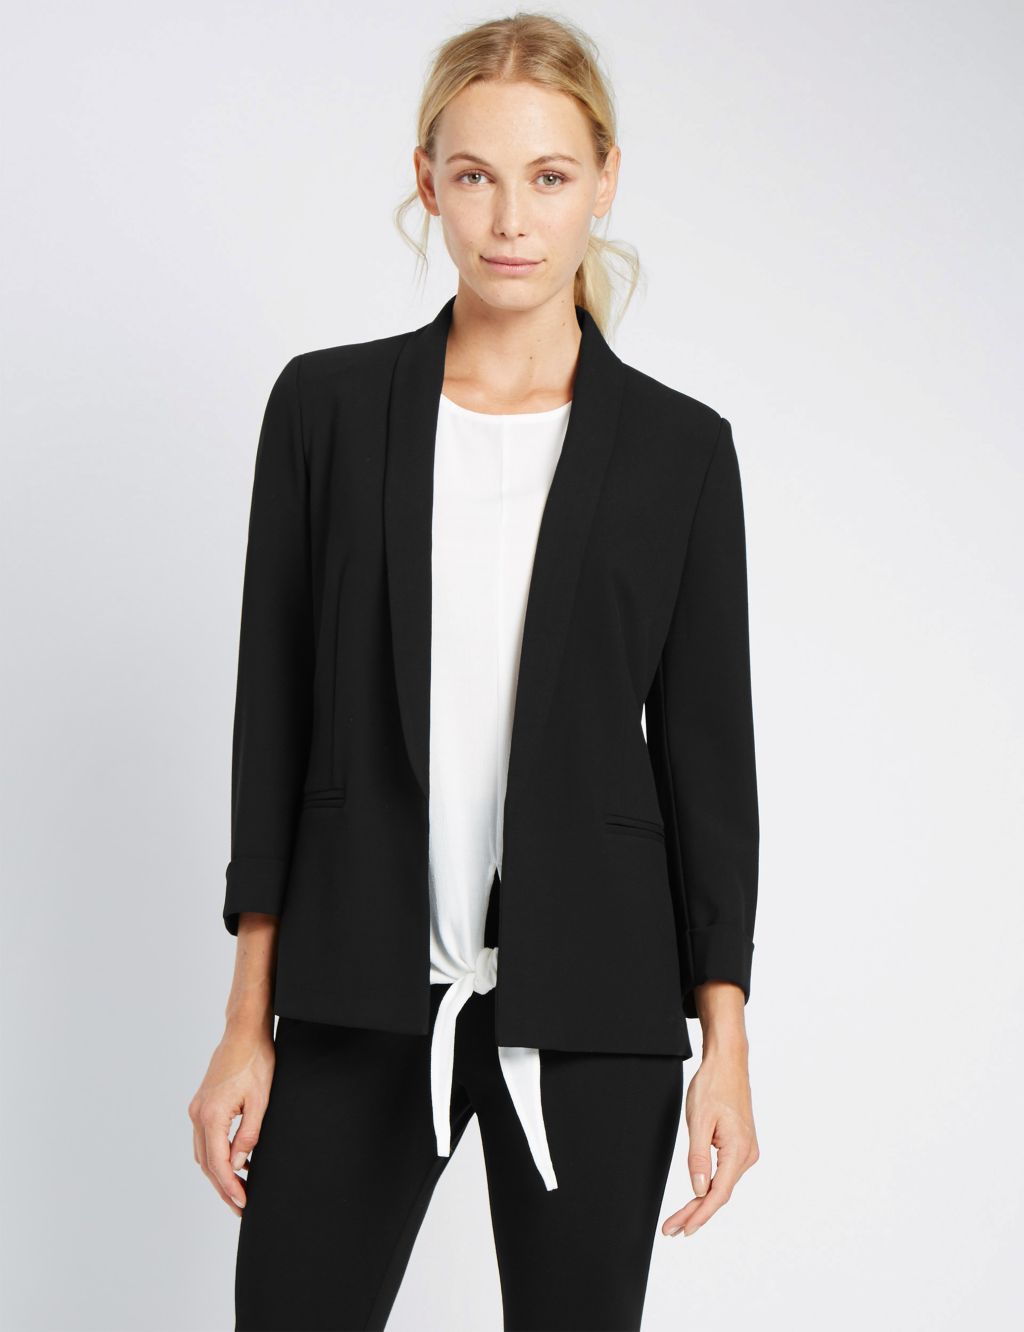 Turn Back Cuff Jacket | M&S Collection | M&S